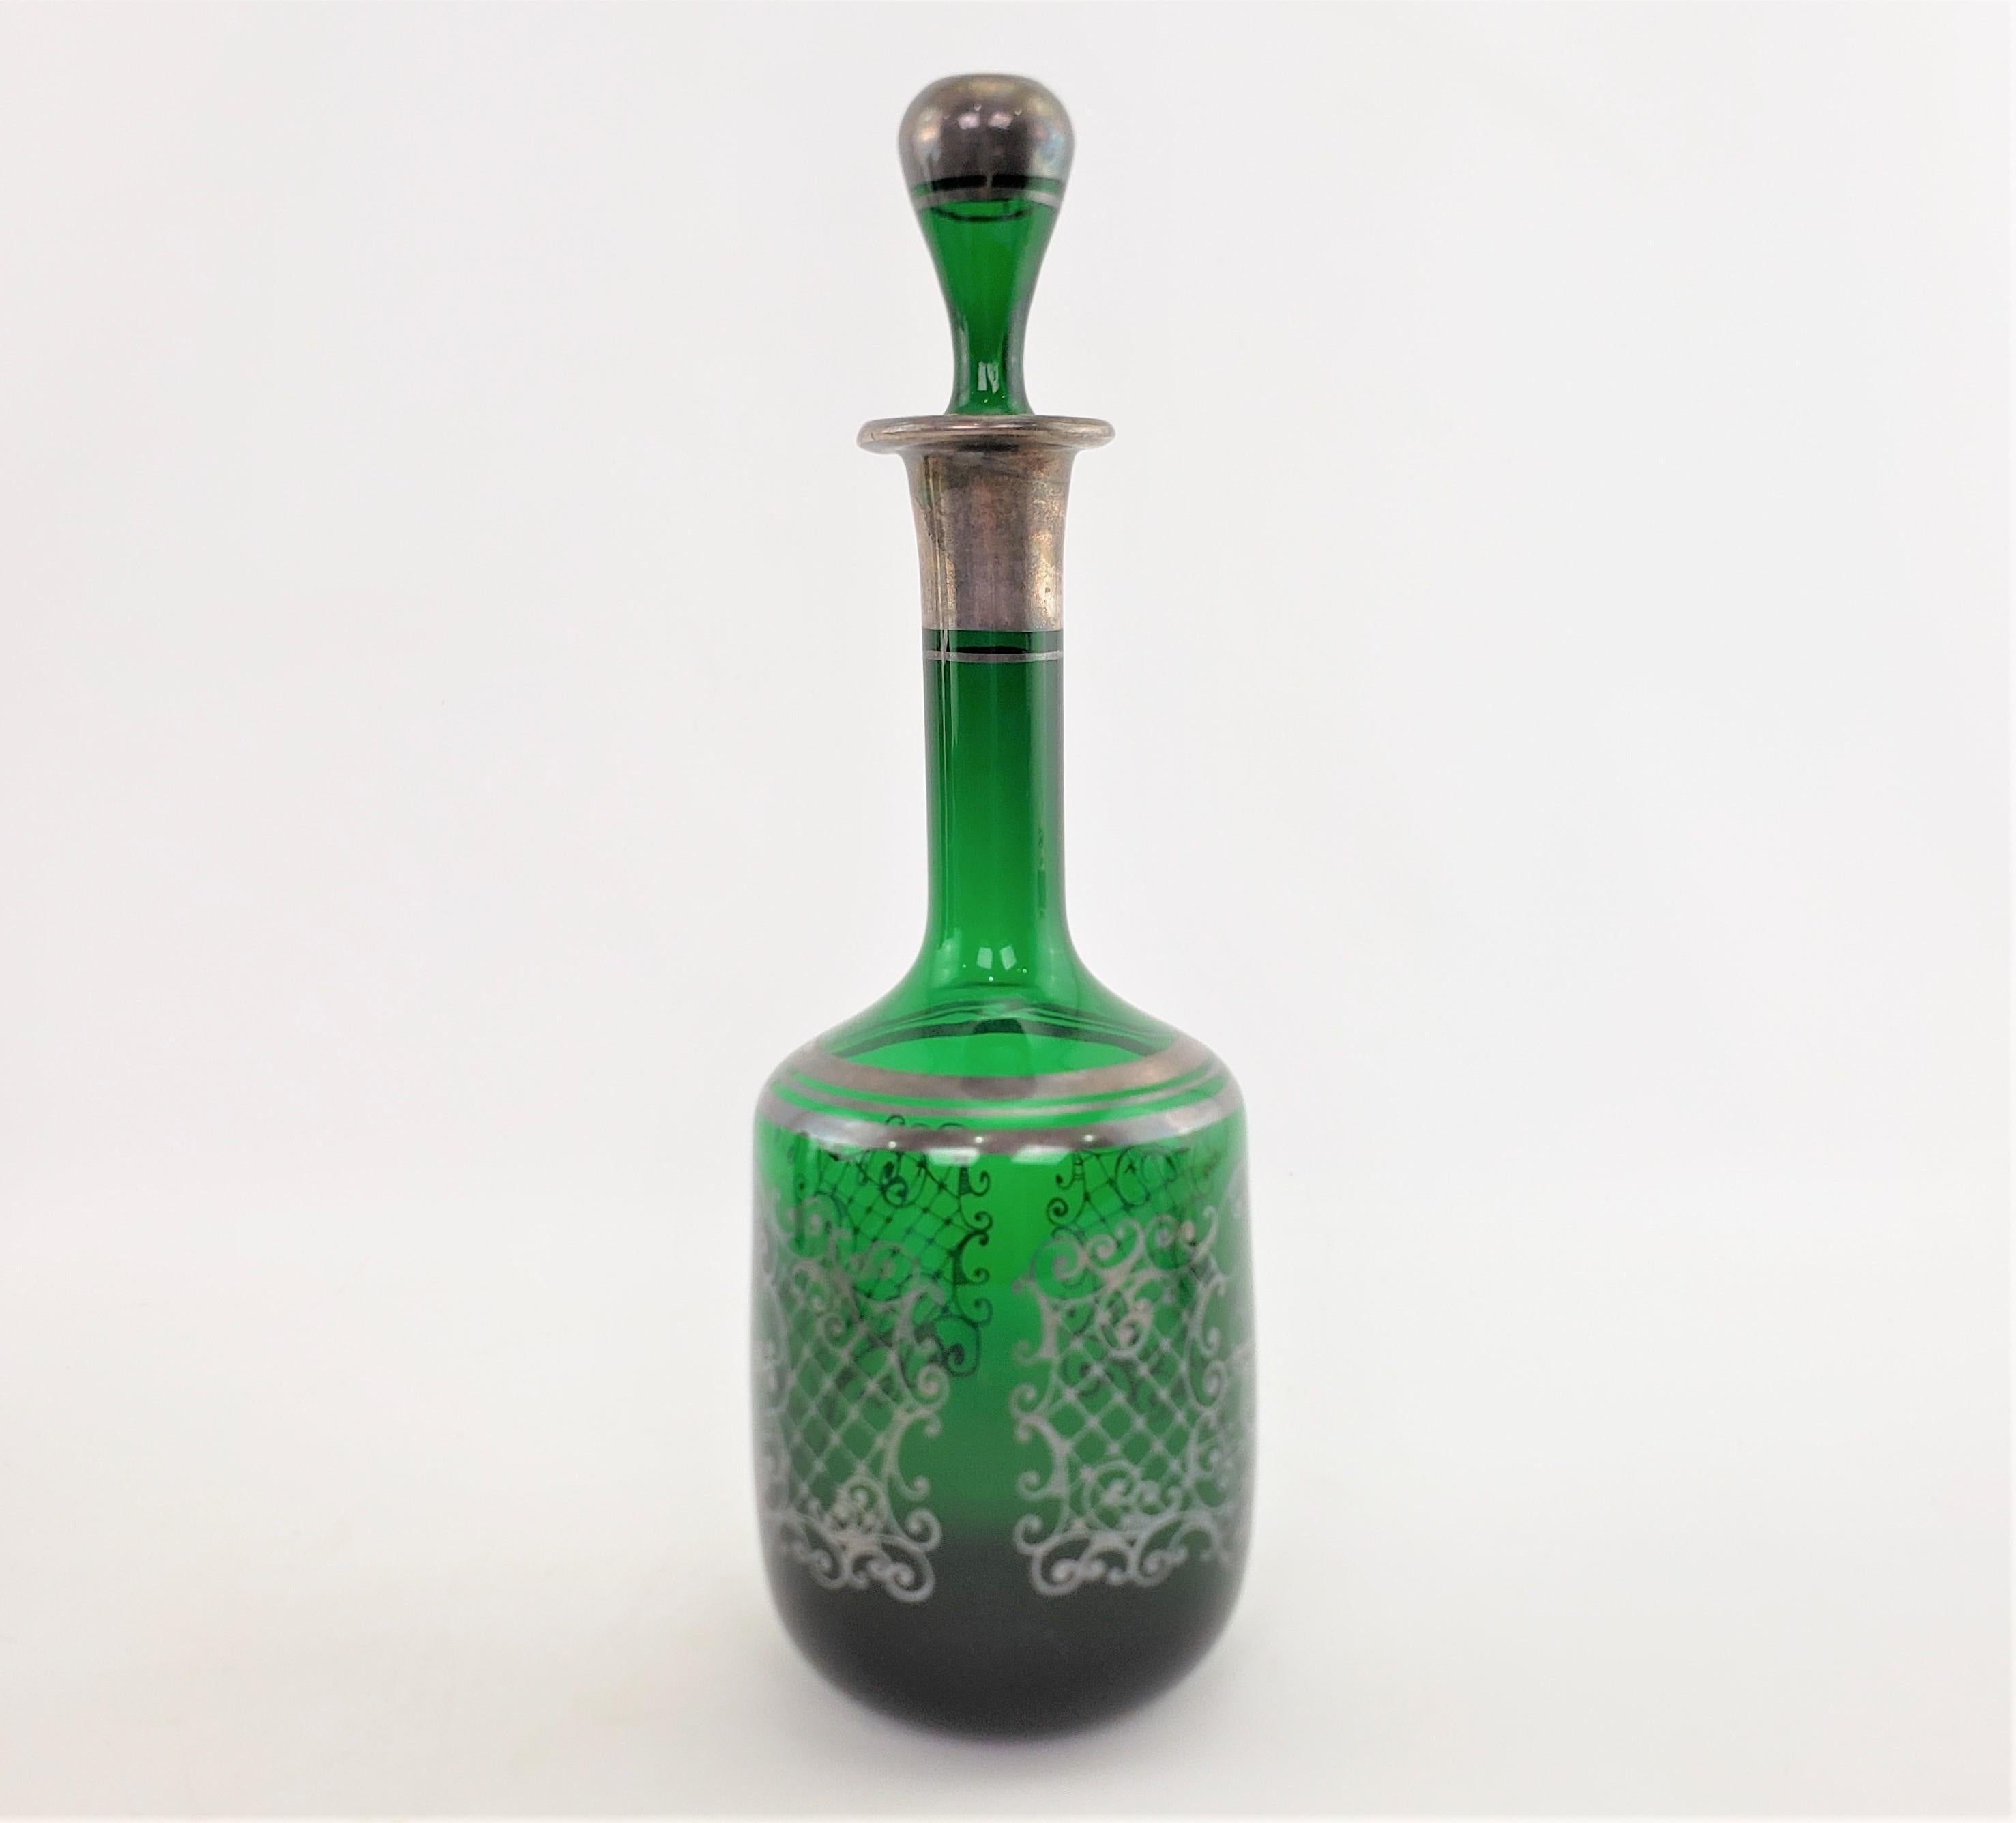 French Antique Deep Green Bottle Decanter with Silver Overlay Swan & Pond Decoration